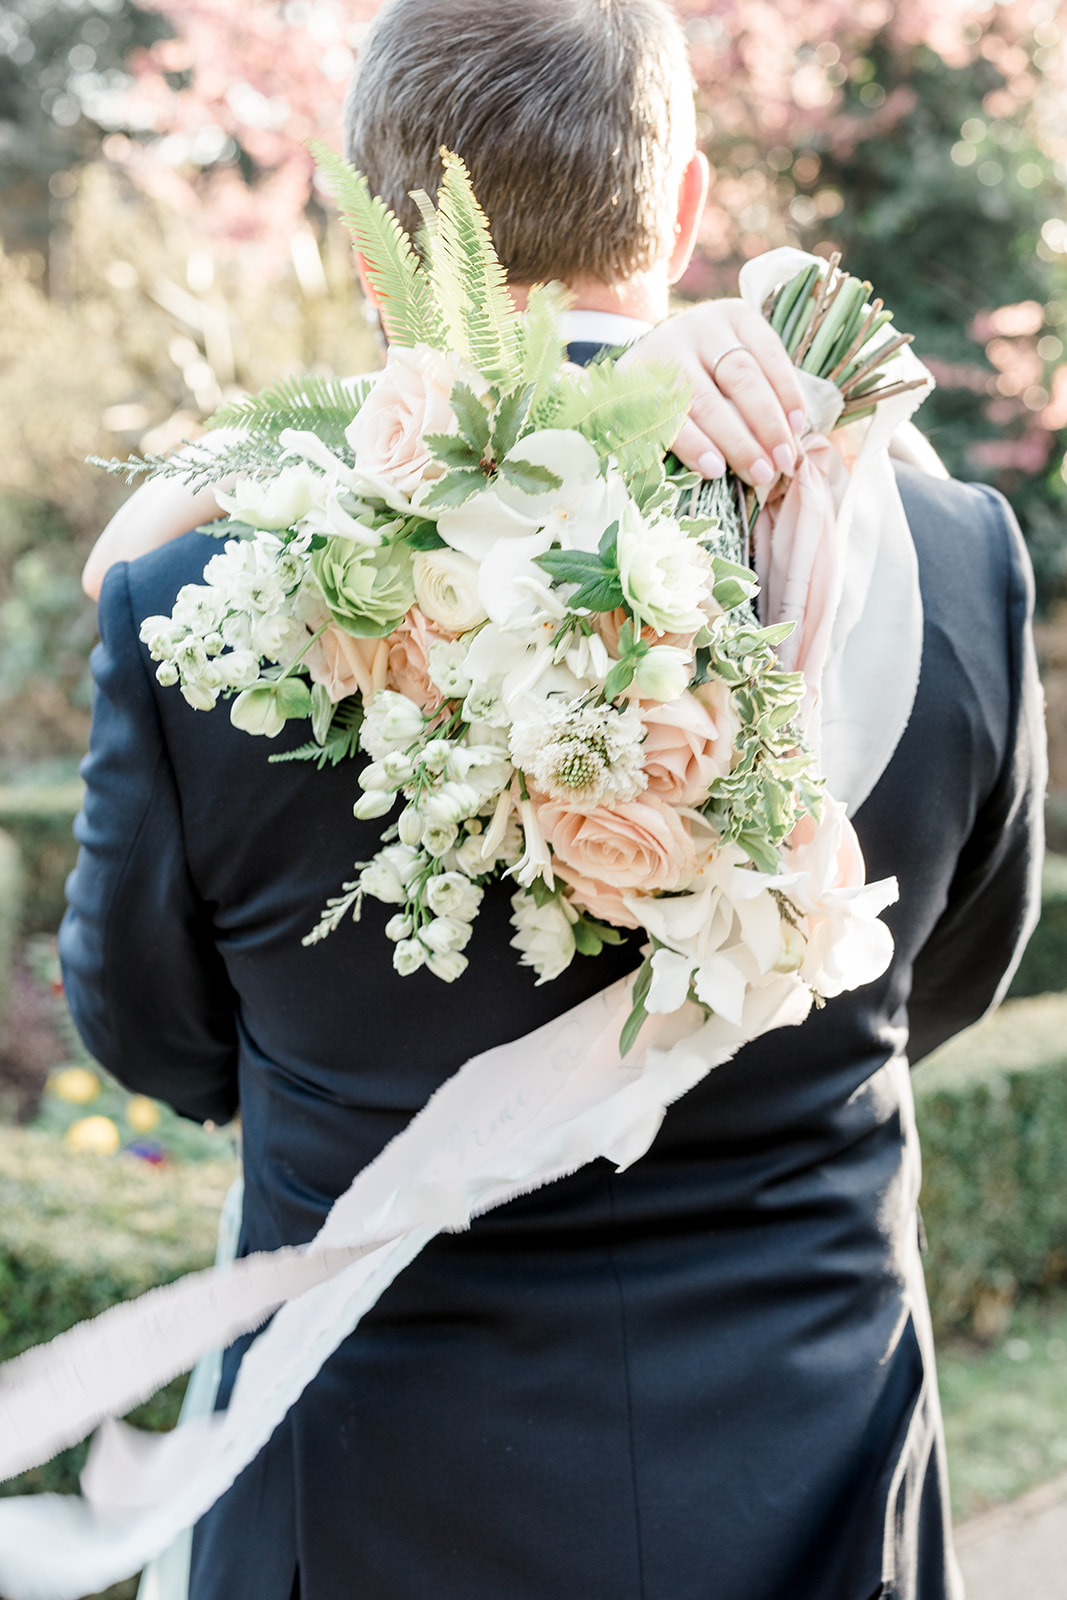 Wedding bouquet with blush roses - Kelsie Scully Photography